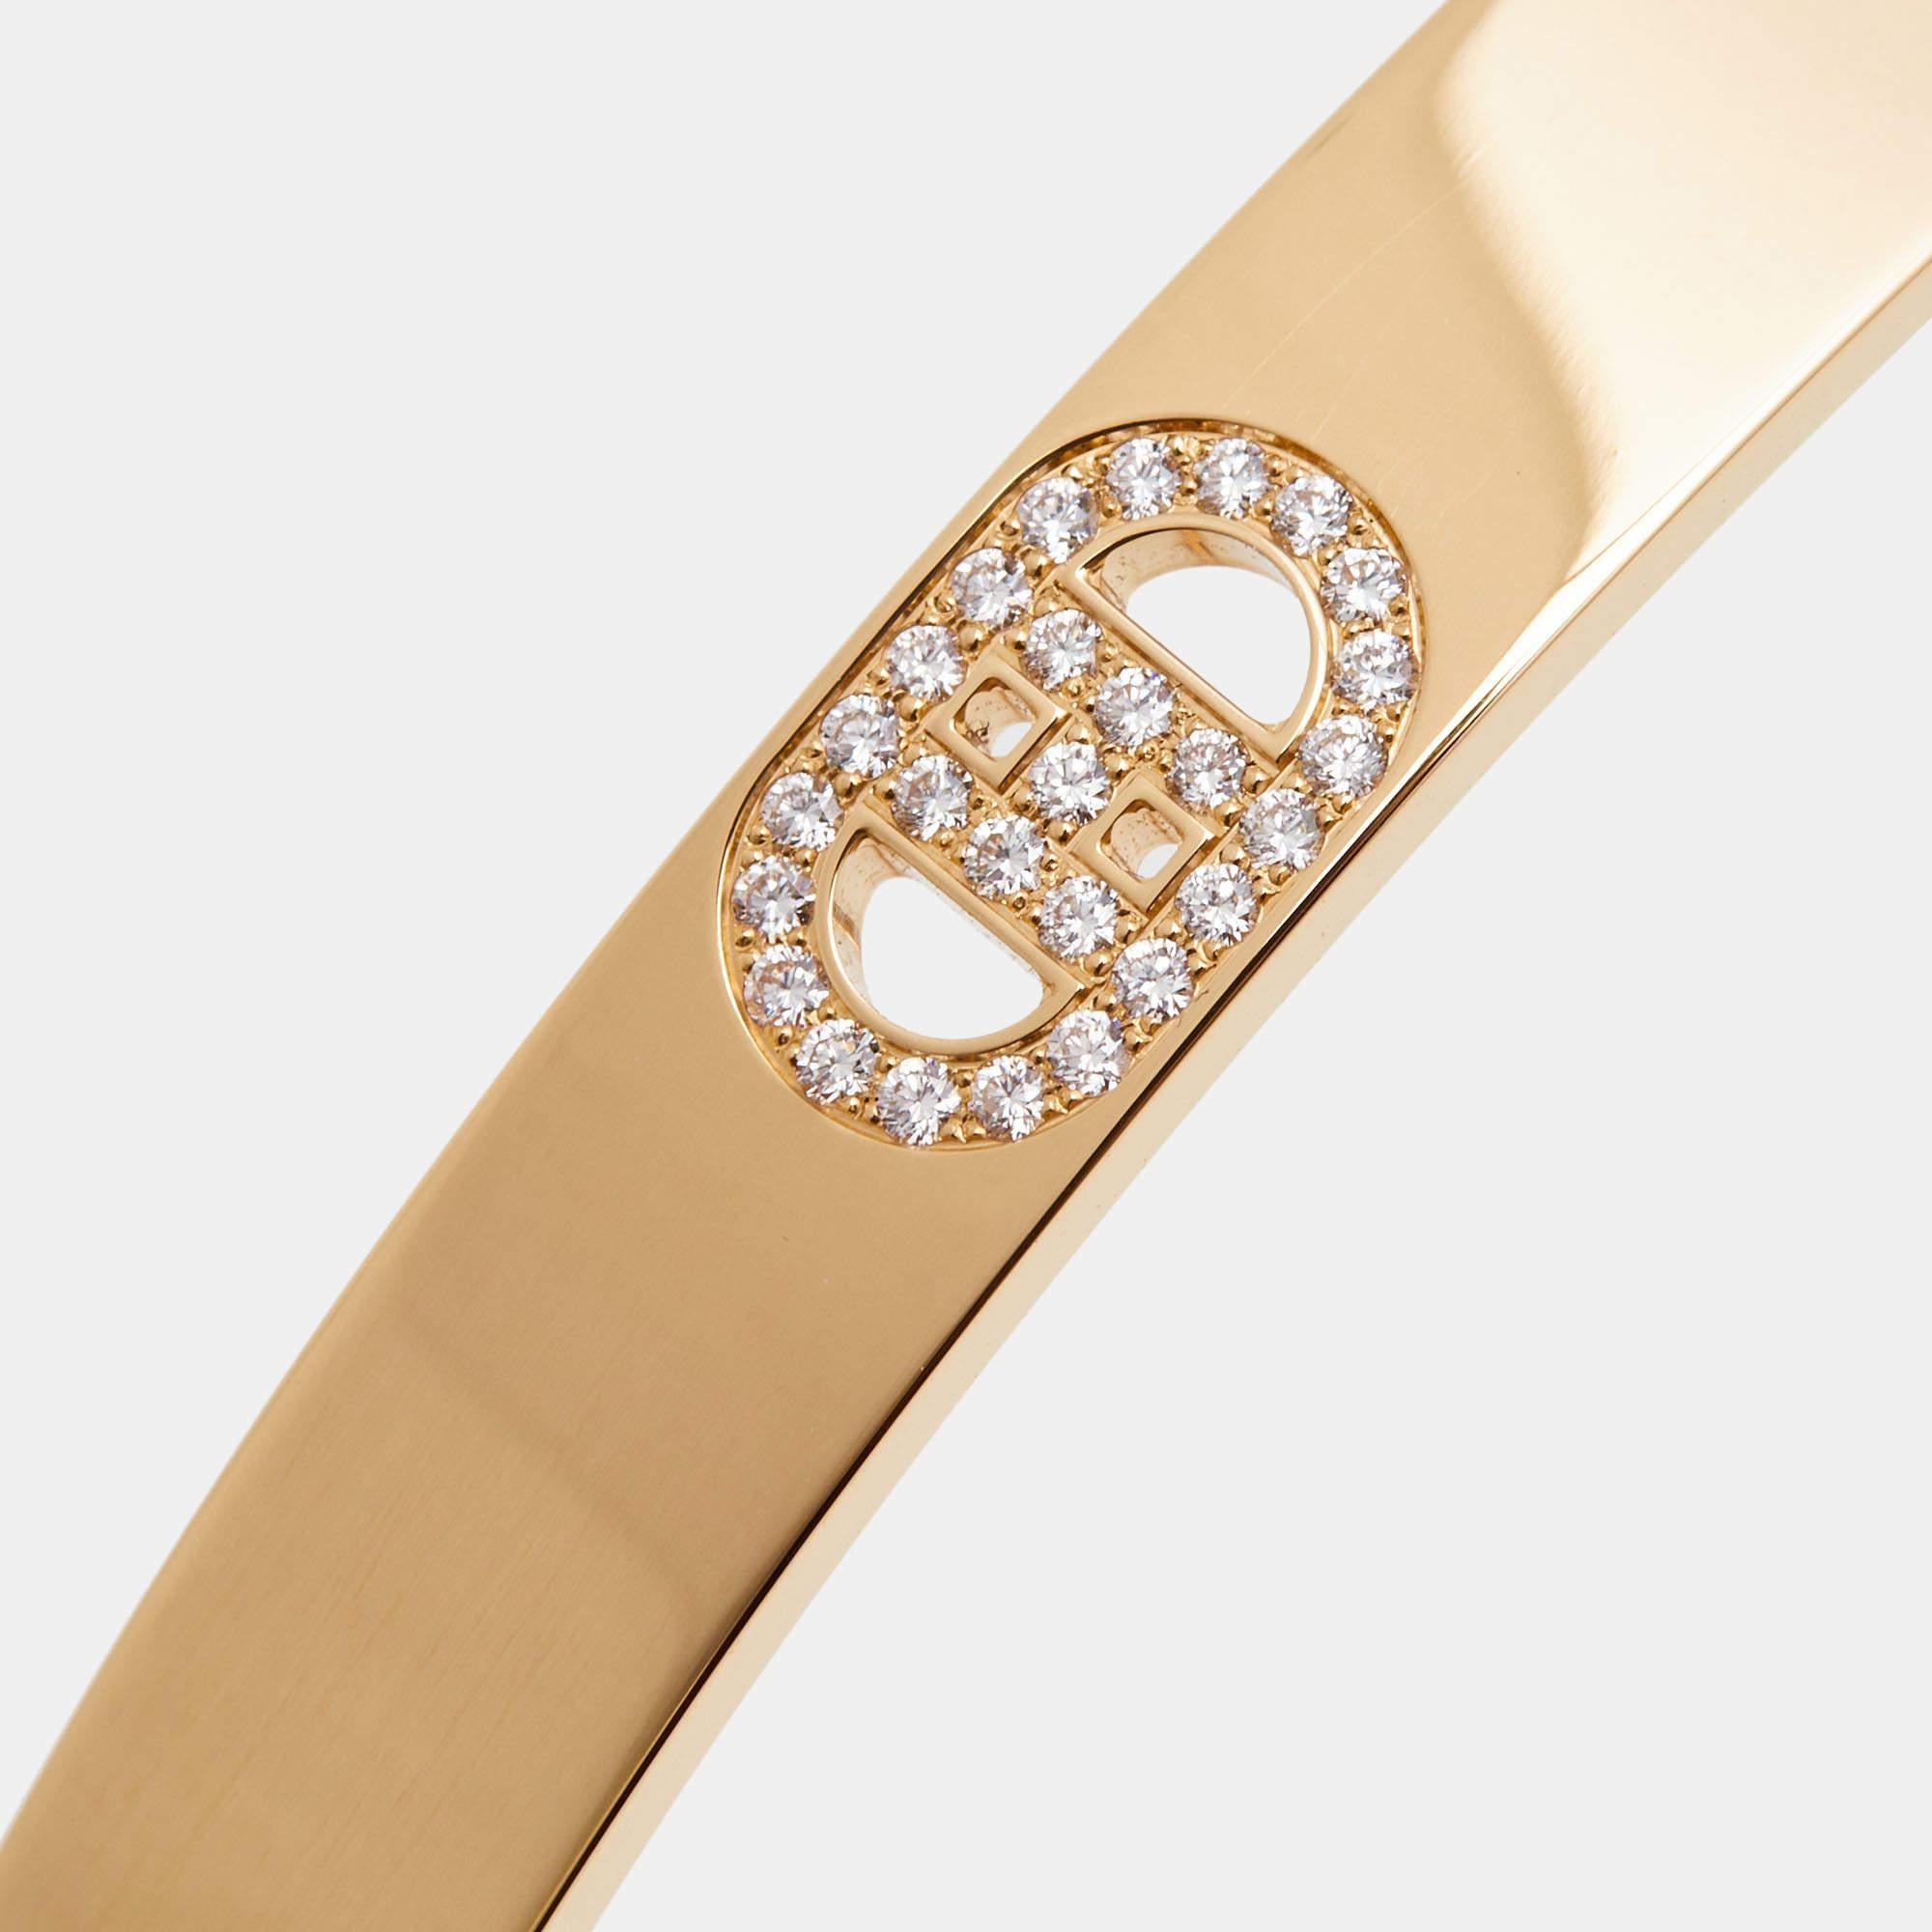 The Hermes H d'Ancrebracelet is a luxurious and exquisite piece of jewelry. Crafted from stunning 18k rose gold, it features sparkling diamonds, adding a touch of elegance and sophistication. This bracelet seamlessly combines timeless design with